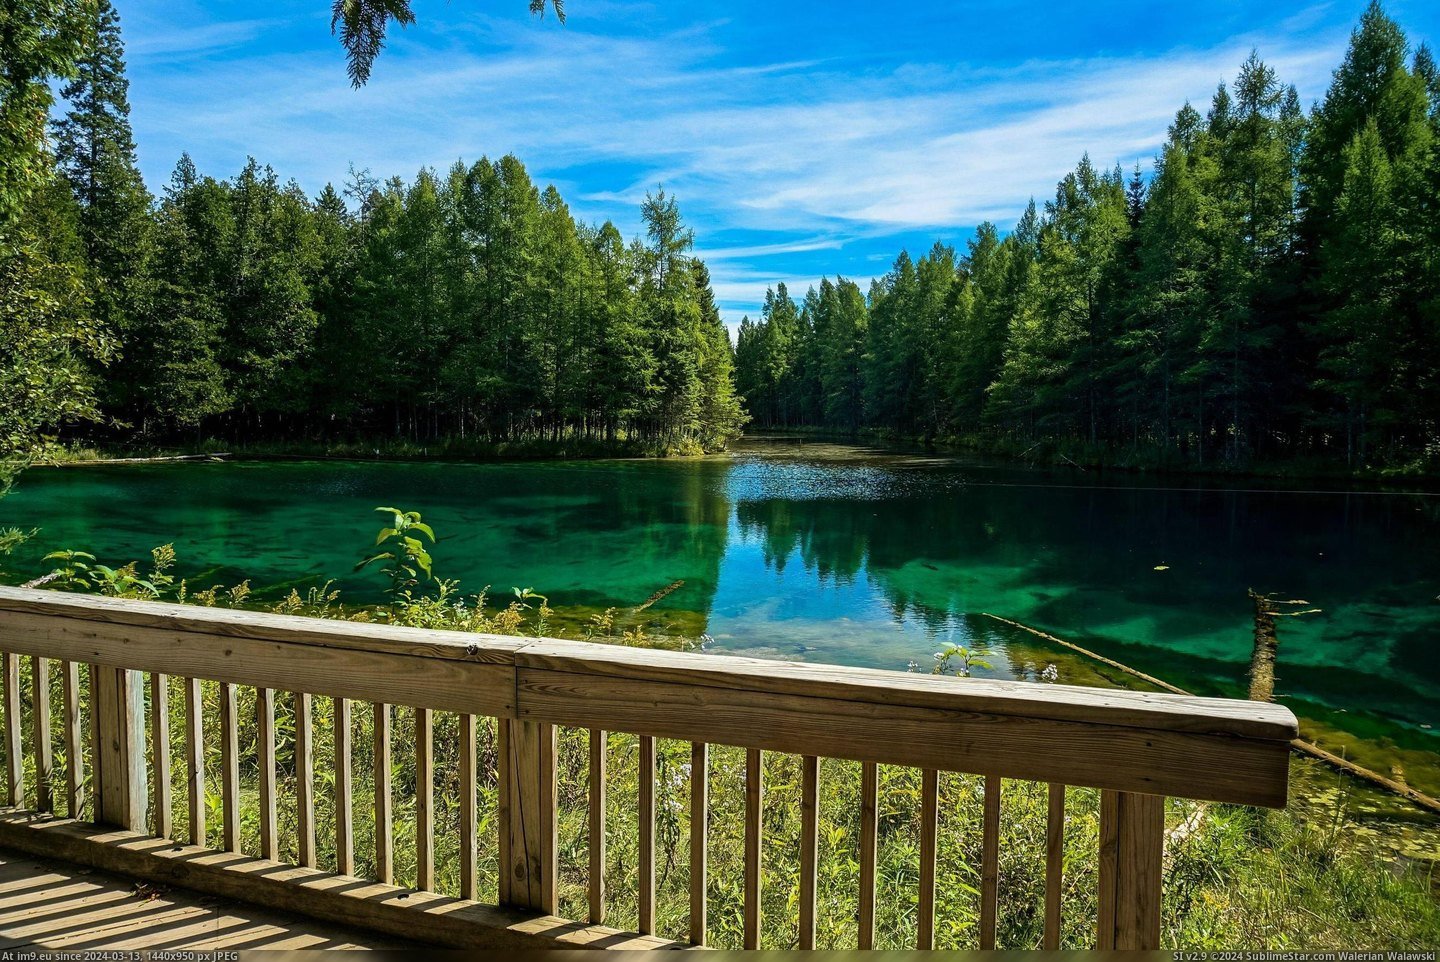 #Mirror #Natural #Early #Called #Americans #Native #Freshwater #Spring #Largest #Heaven #Michigan [Pics] Michigan's largest natural freshwater spring, early Native Americans called it the 'Mirror of Heaven.' Pic. (Obraz z album My r/PICS favs))